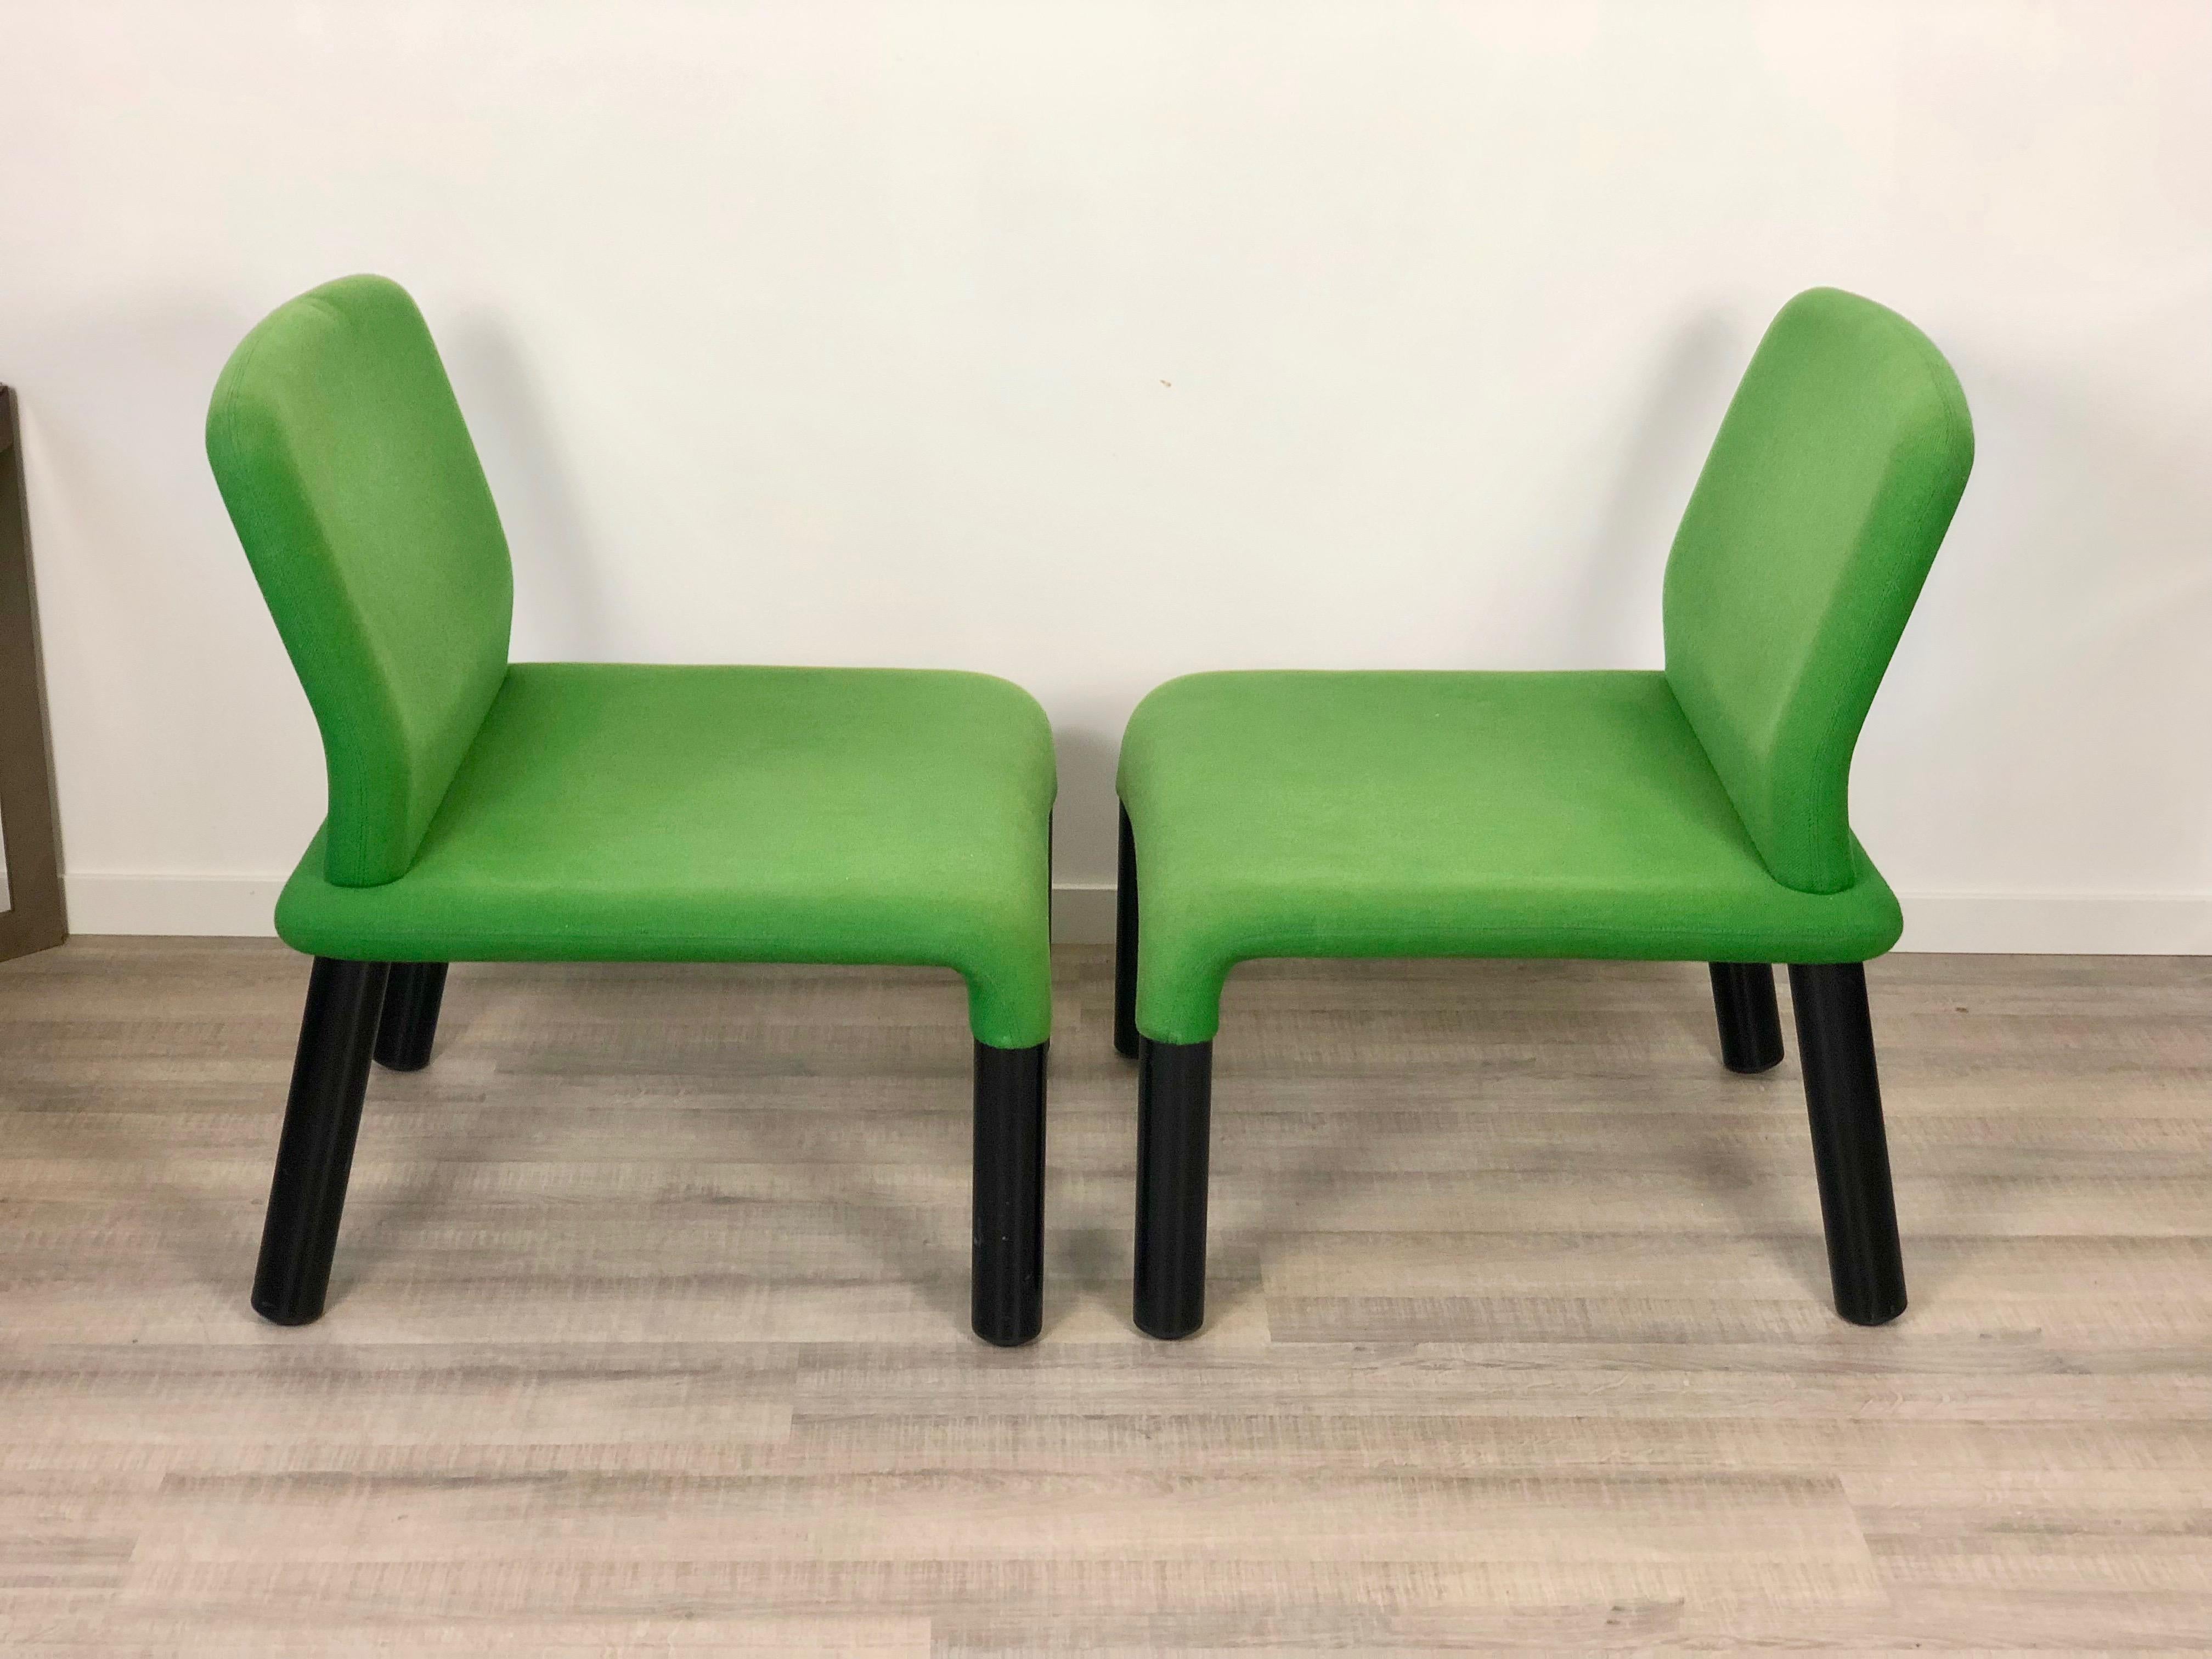 Pair of Green Armchair in Plastic Fabric, Italy, 1970s For Sale 1